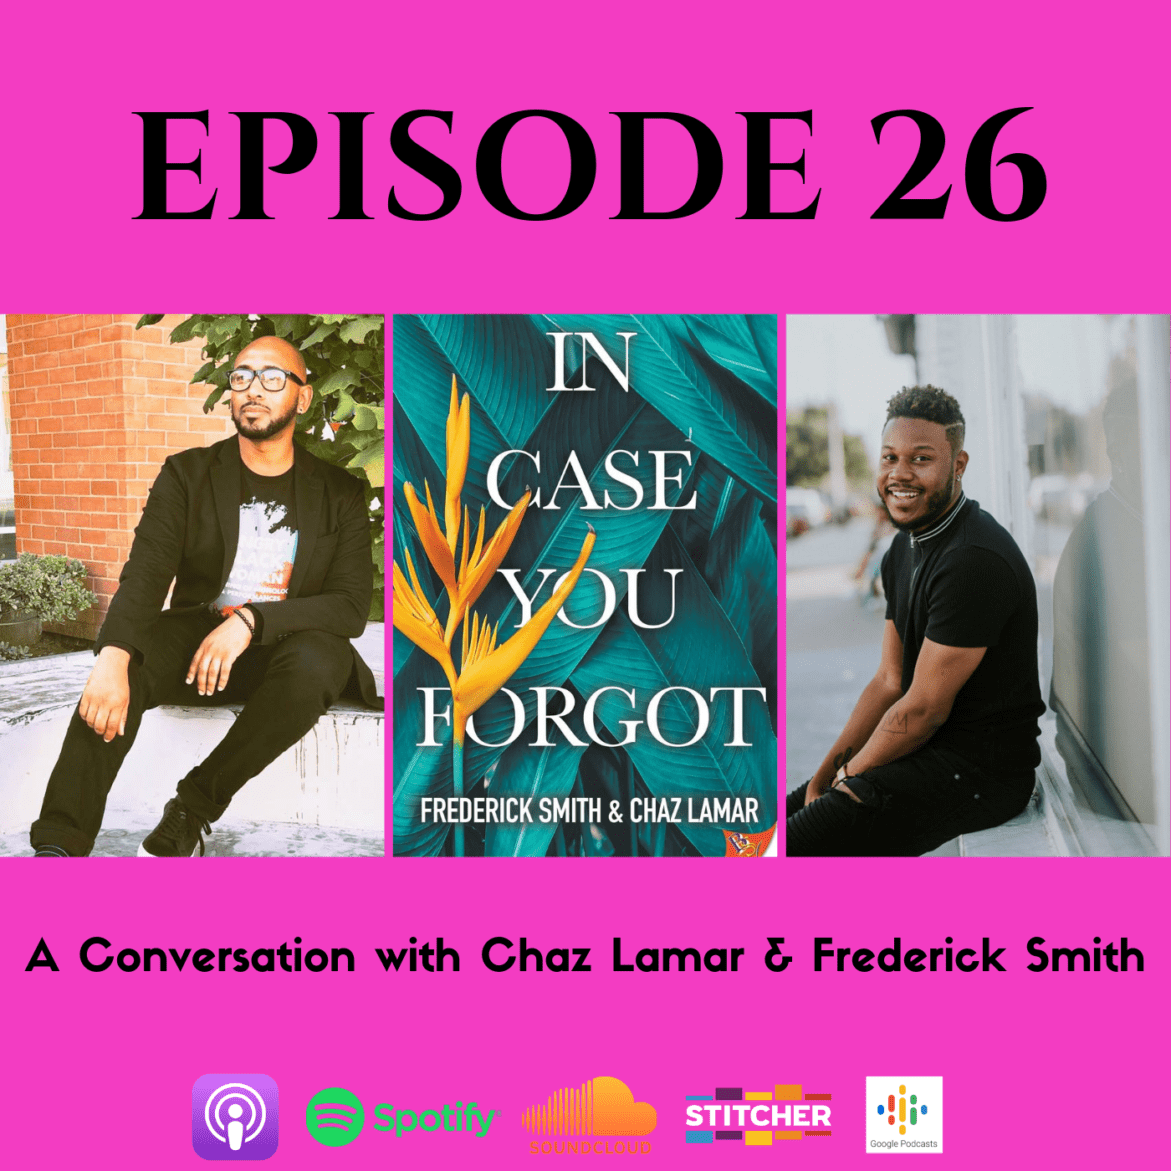 Black Podcasting - DBM Episode 26 In Case You Forgot: A Conversation with Frederick Smith & Chaz Lamar